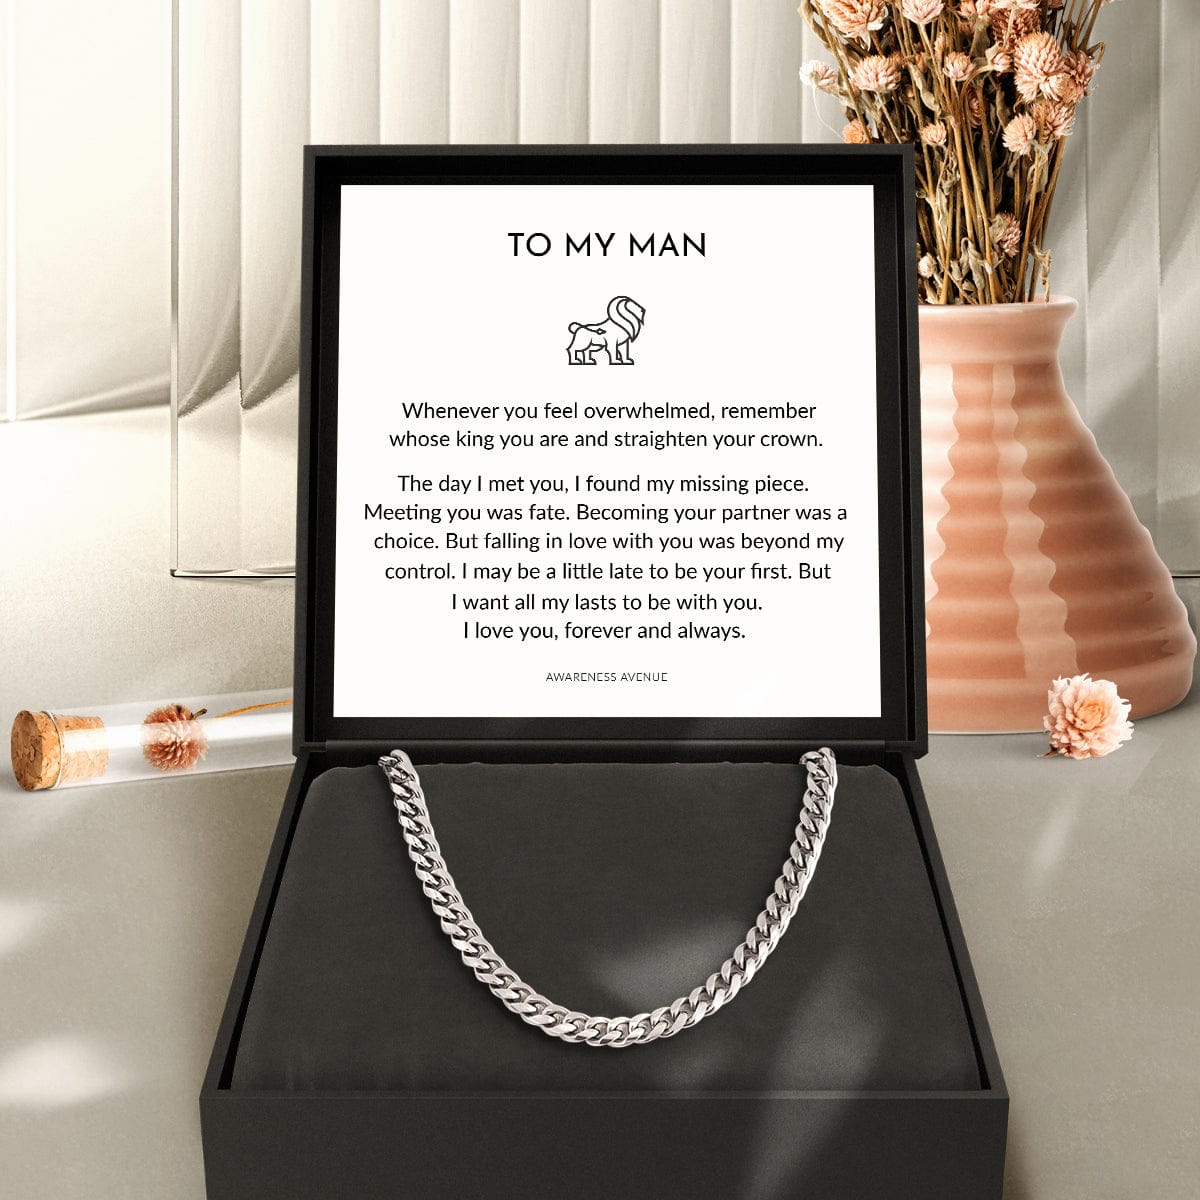 To My Man | Straighten Your Crown | Cuban Link Chain Necklace